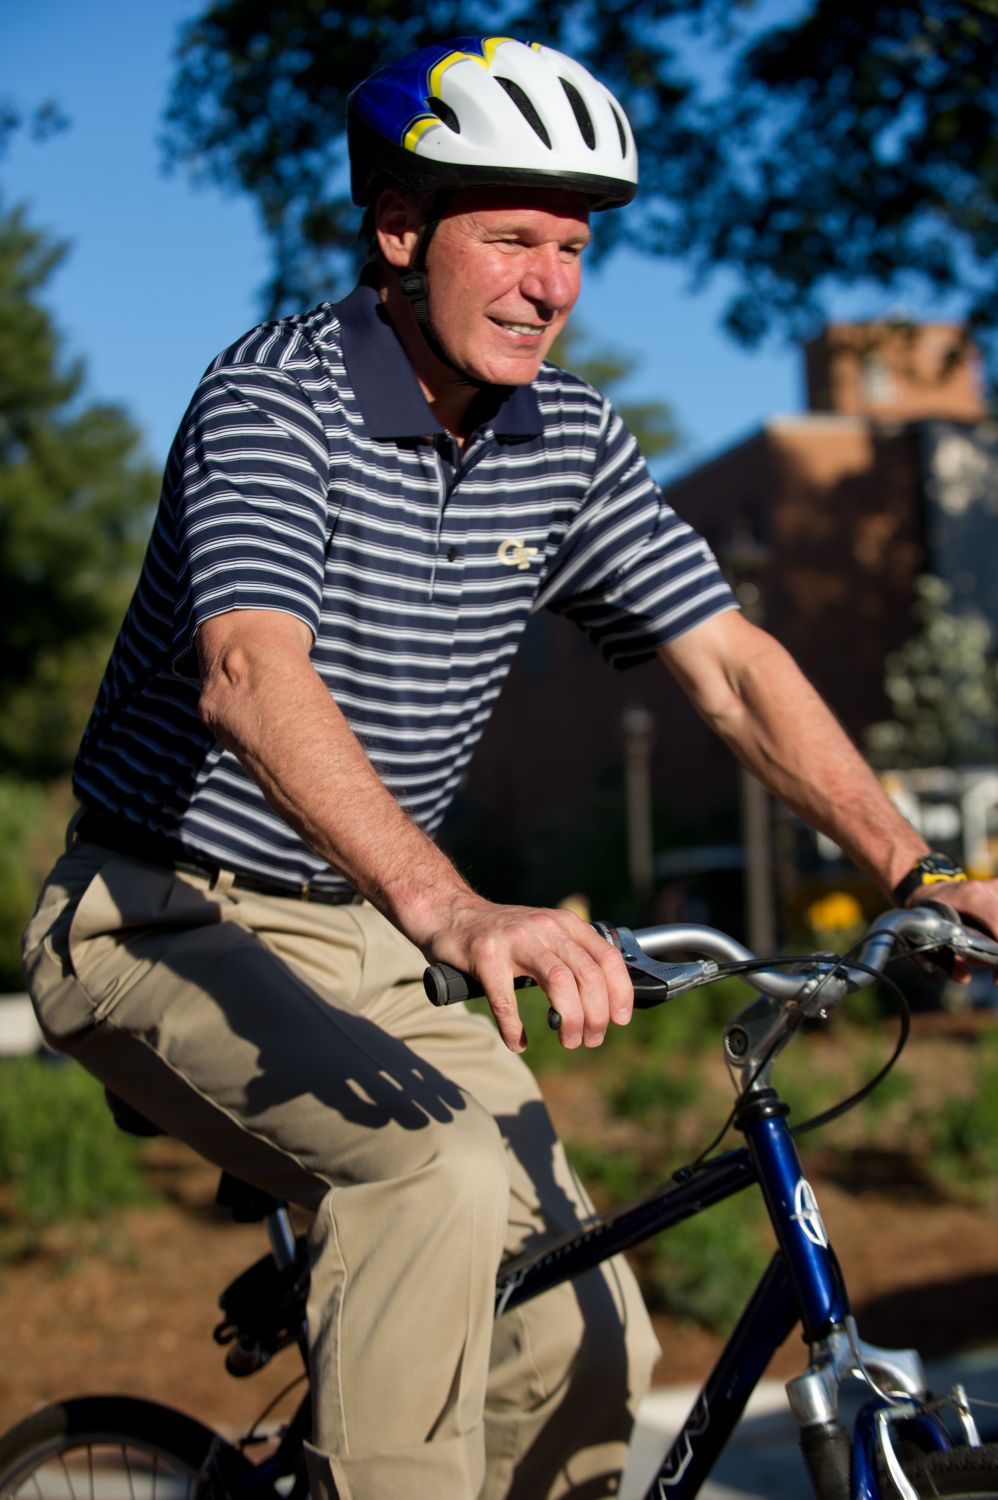 President G.P. "Bud" Peterson demonstrates proper use of a helmet while riding his bike